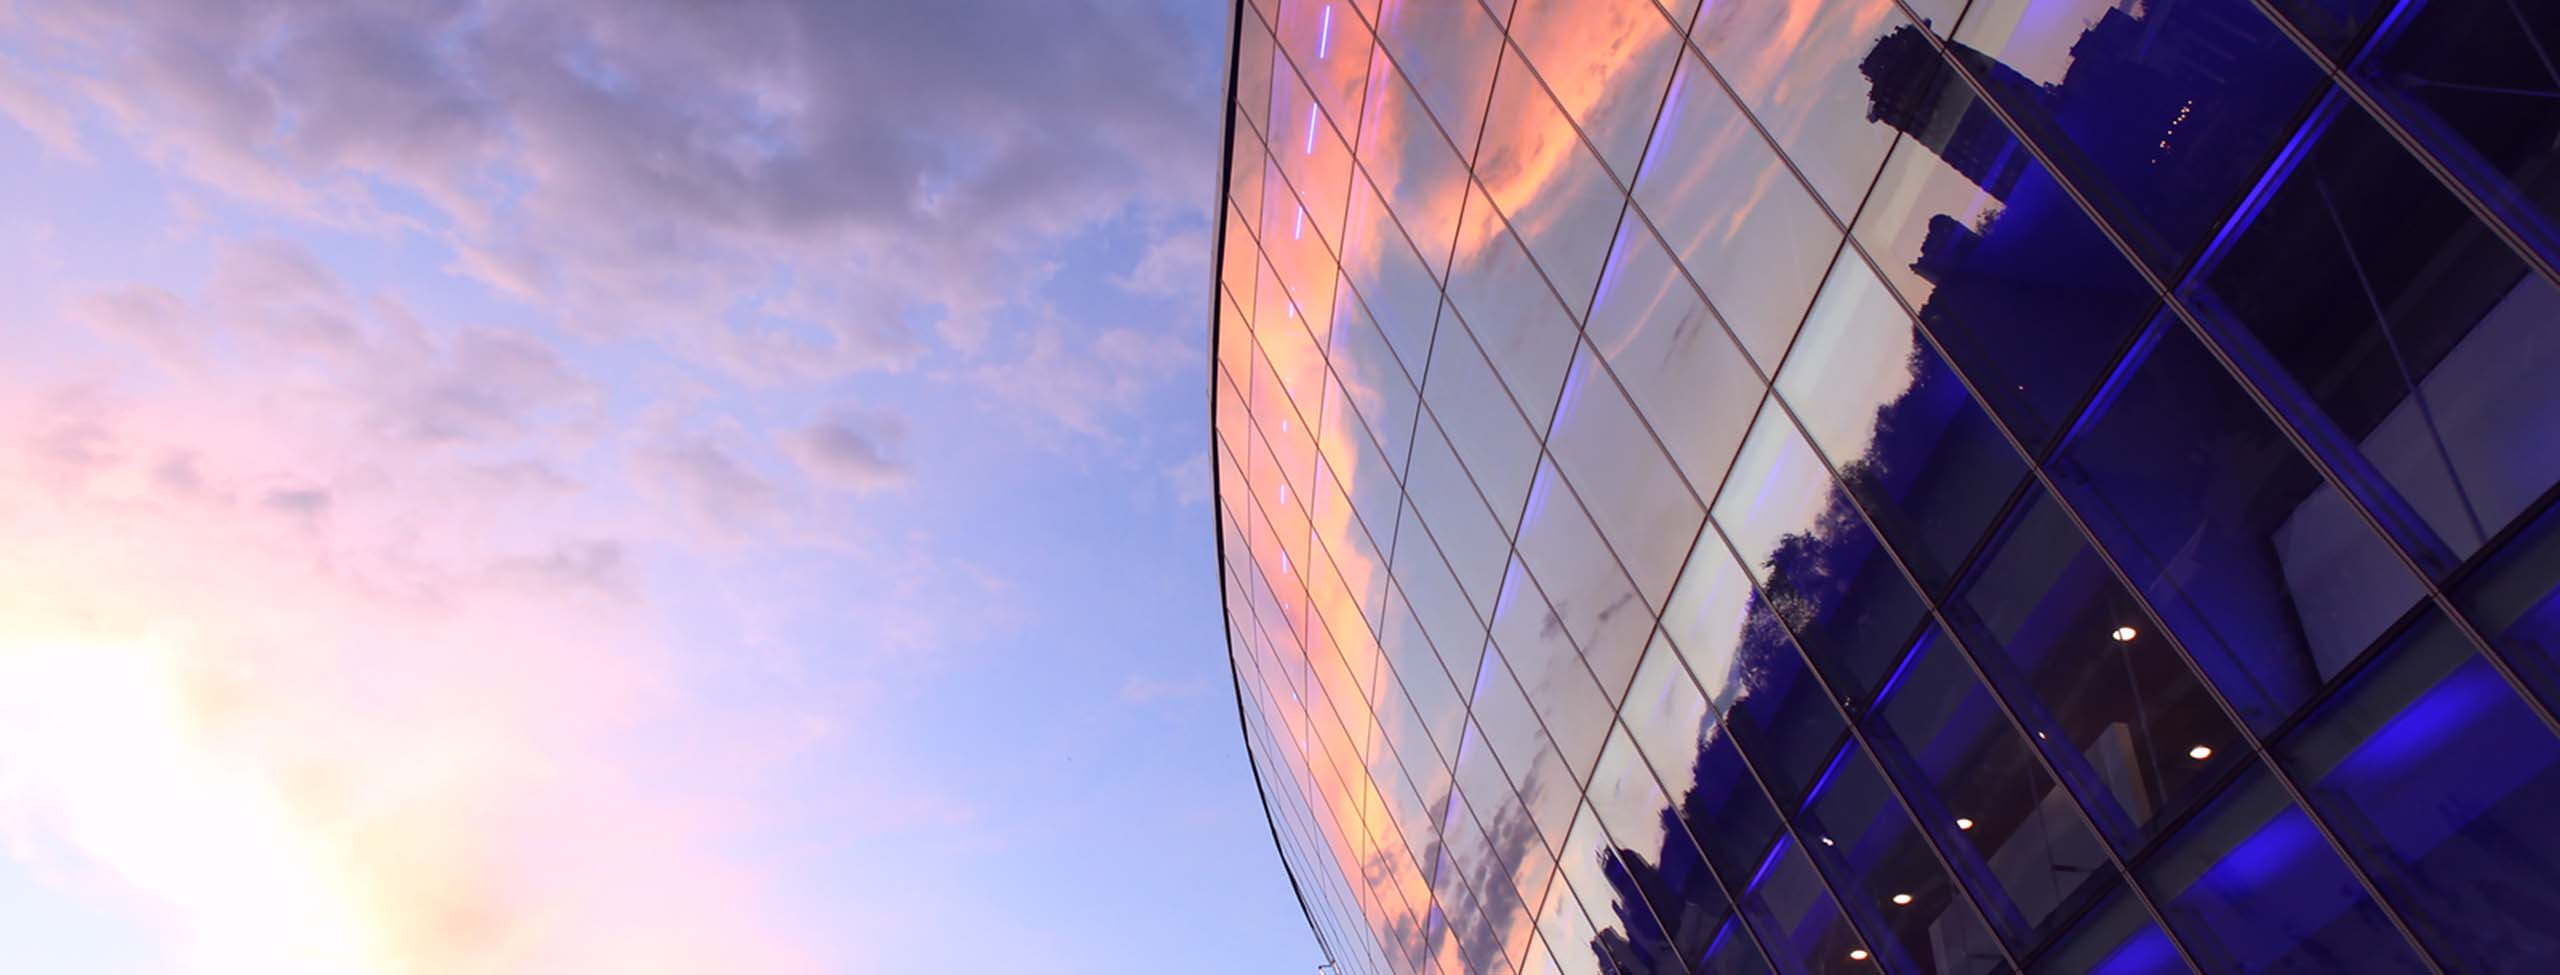 modern glass building with reflection of sky and clouds